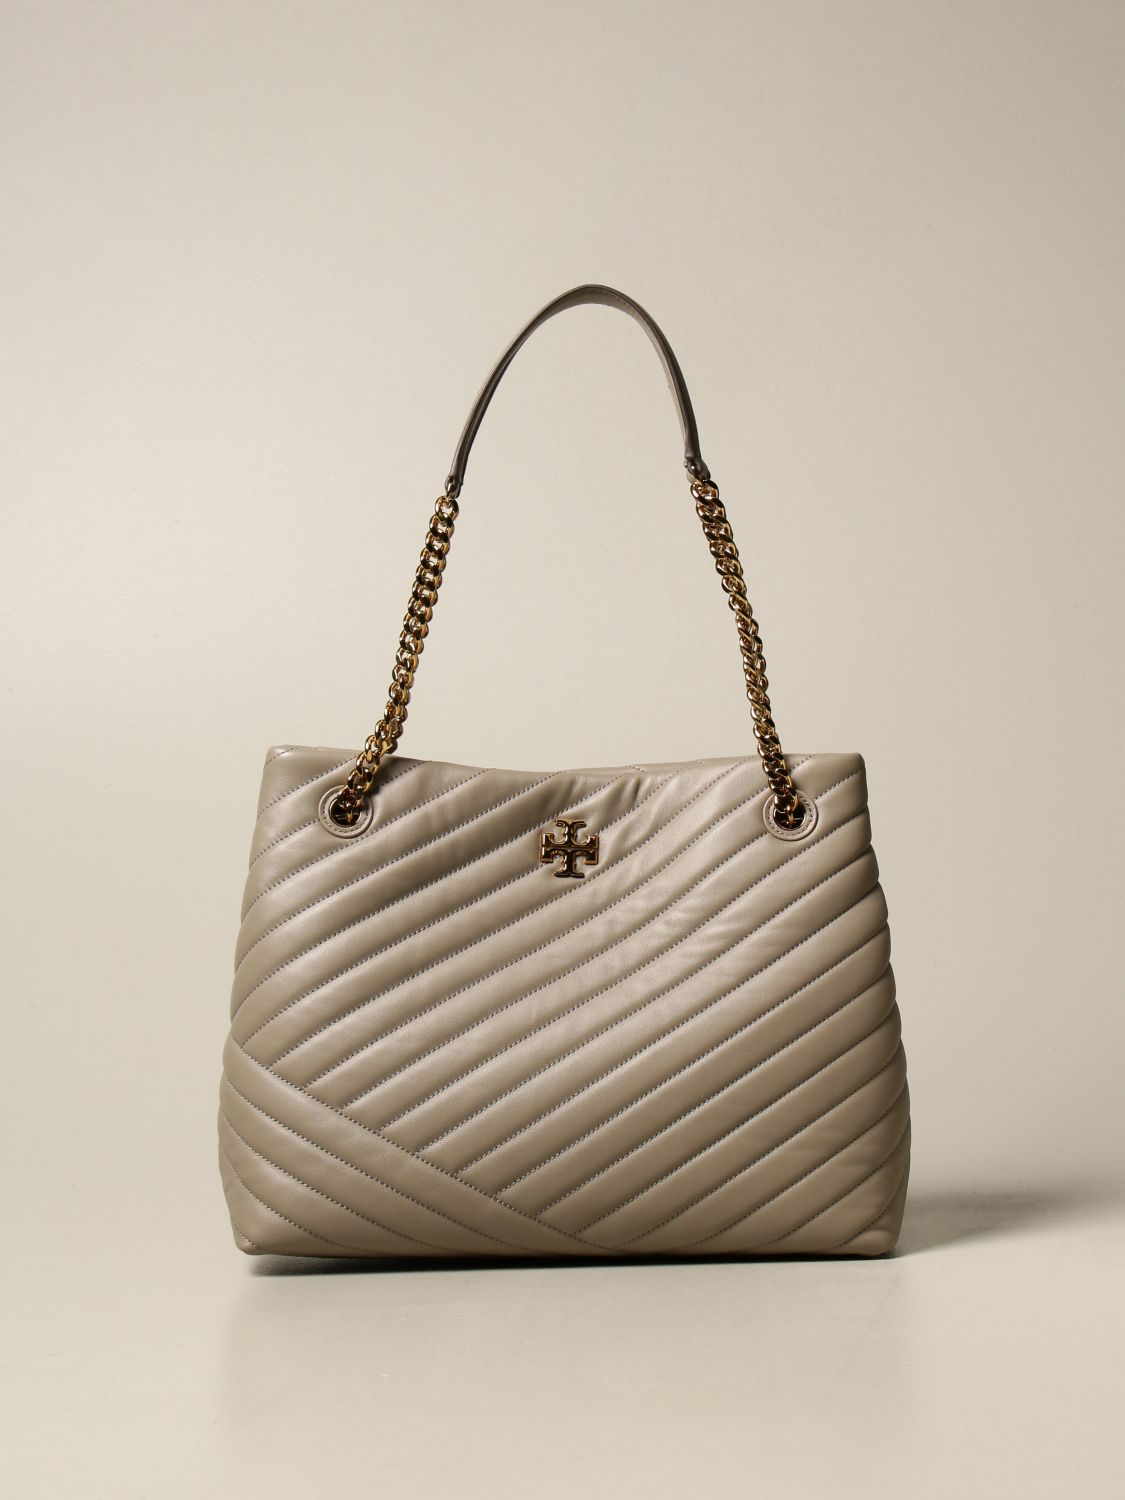 TORY BURCH: Kira bag in quilted leather - Grey | Tory Burch tote bags 56757  online on 